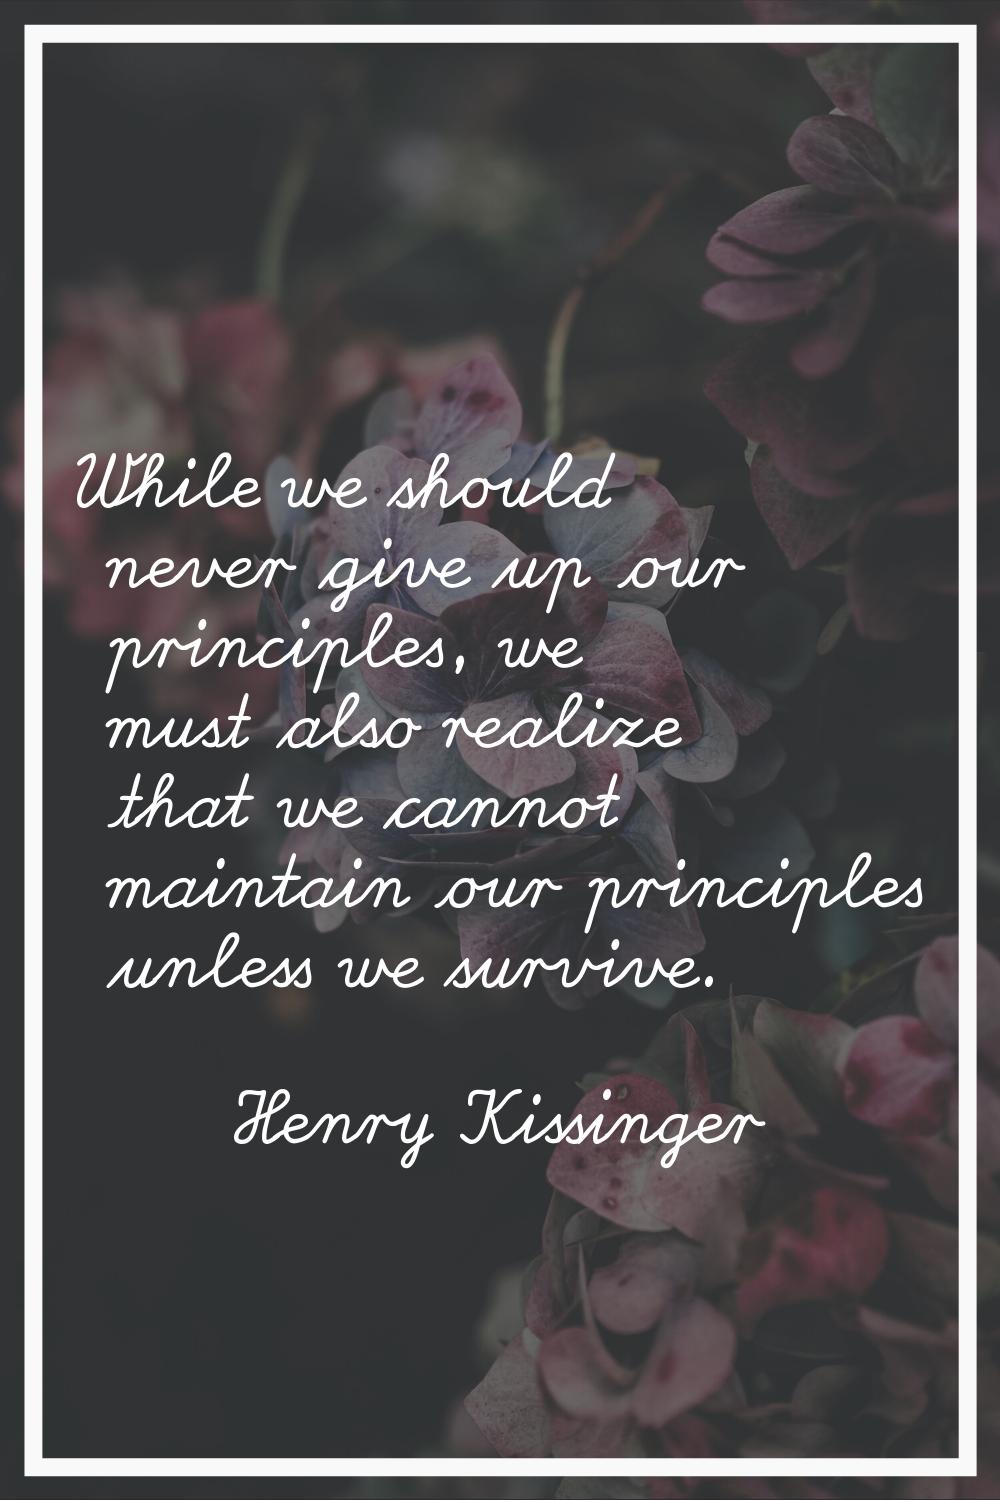 While we should never give up our principles, we must also realize that we cannot maintain our prin